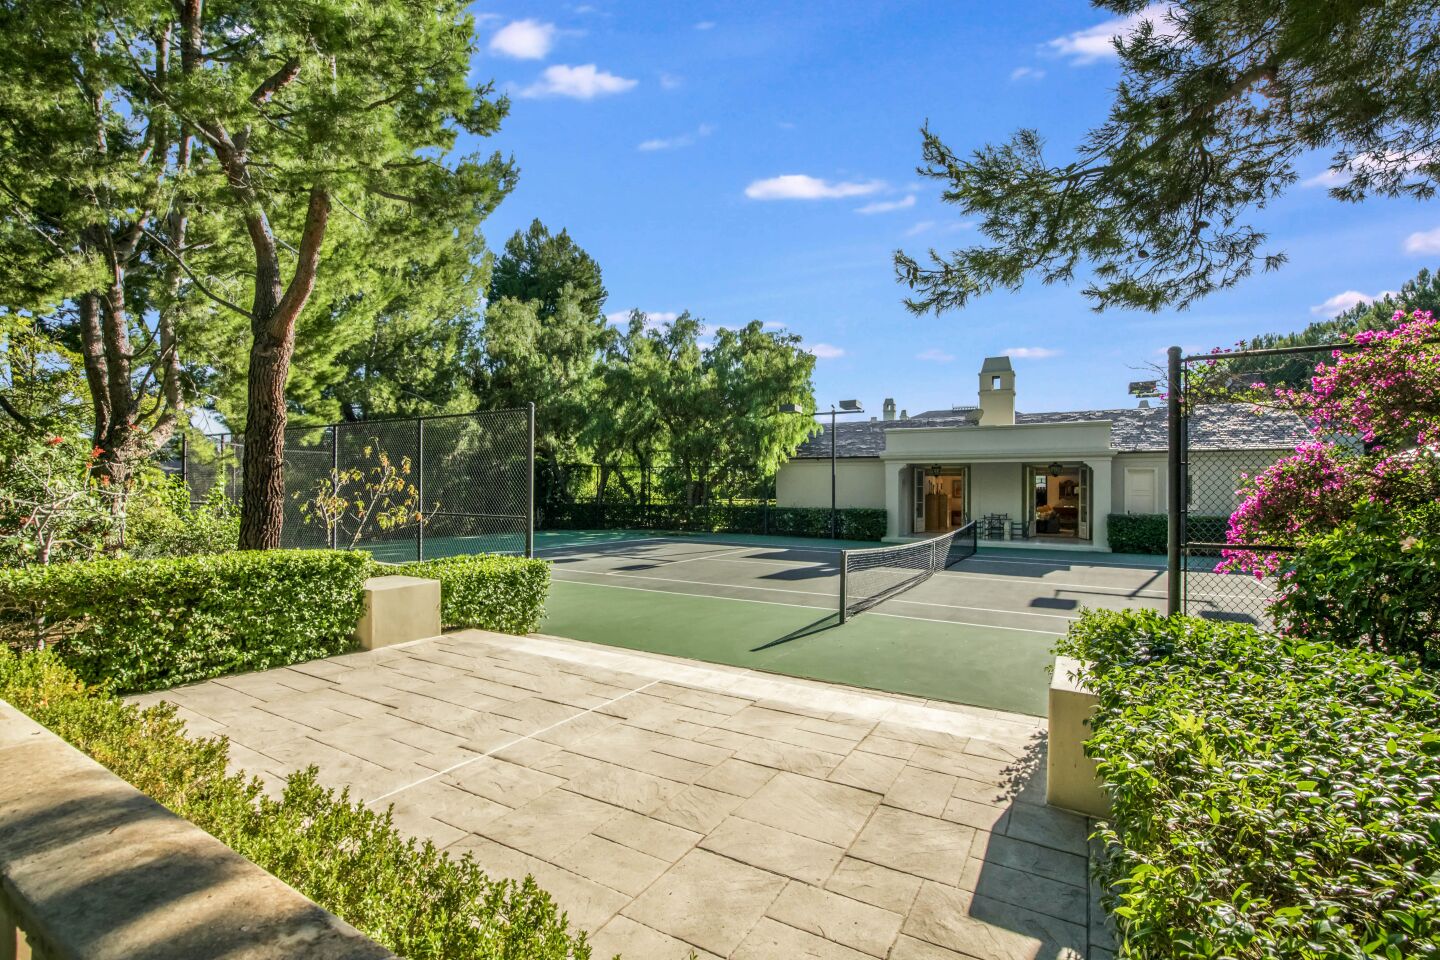 The tennis court is next to the home and greenery.